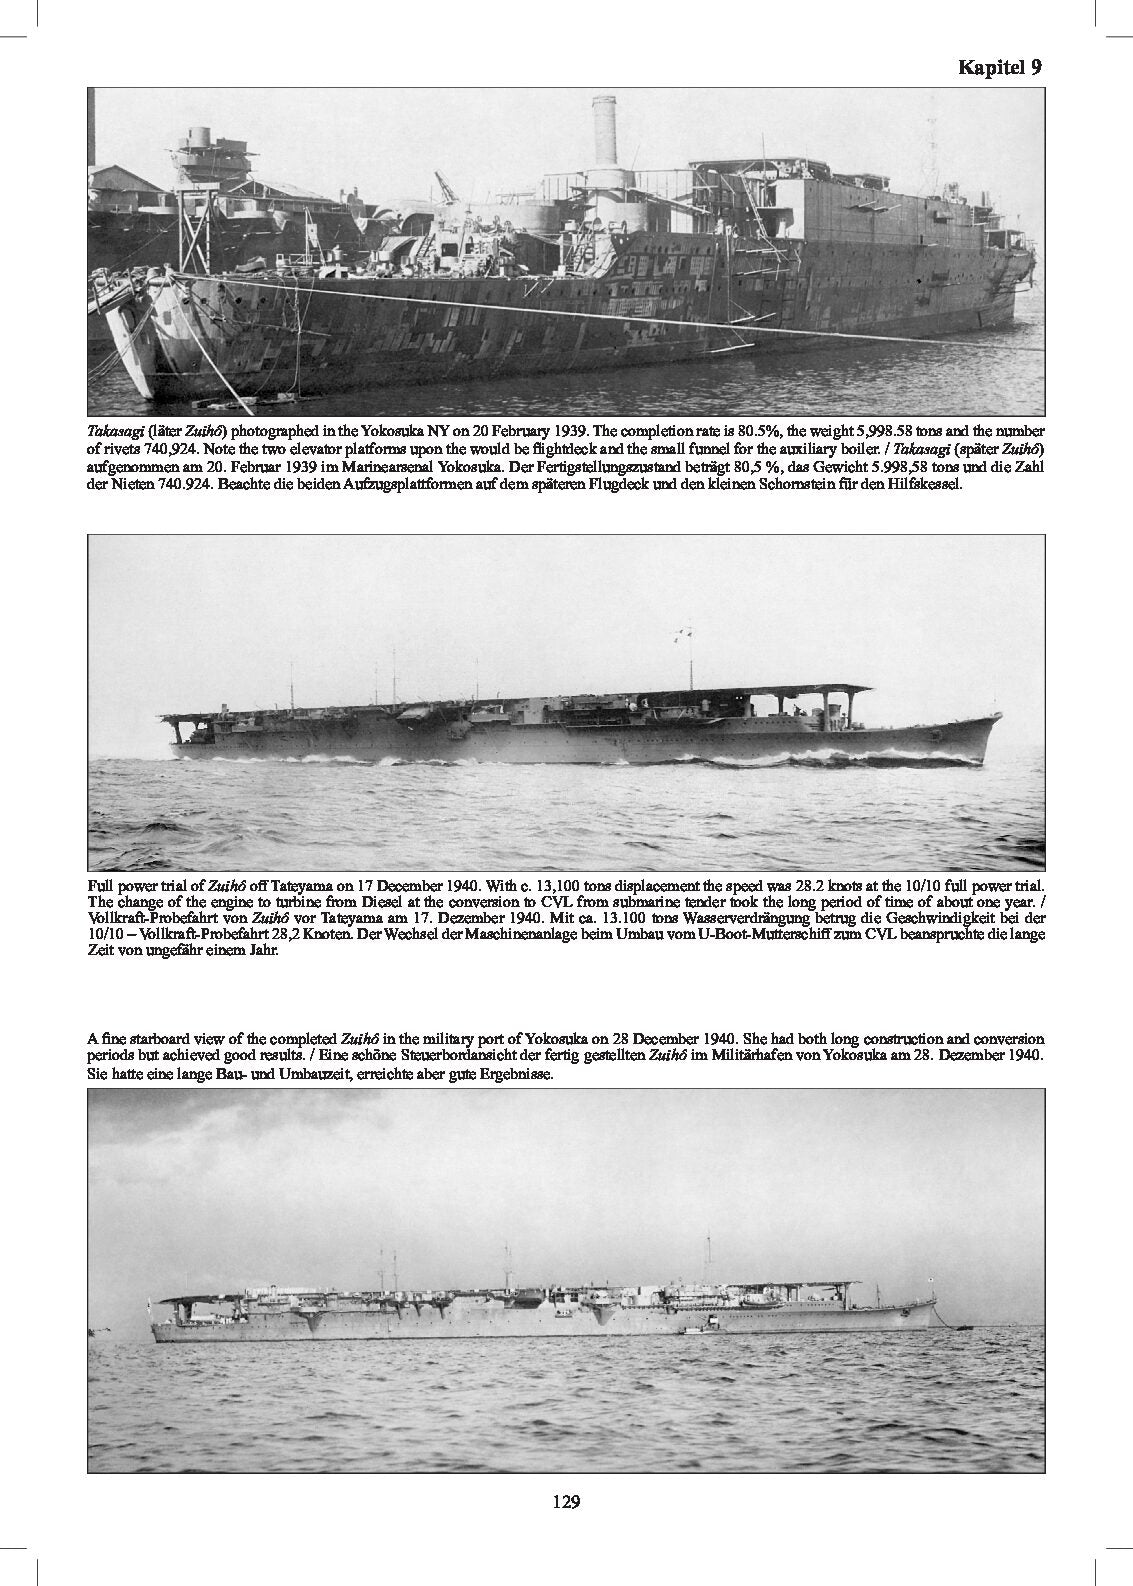 The Aircraft Carriers of the Imperial Japanese Navy and Army- VOLUME 2